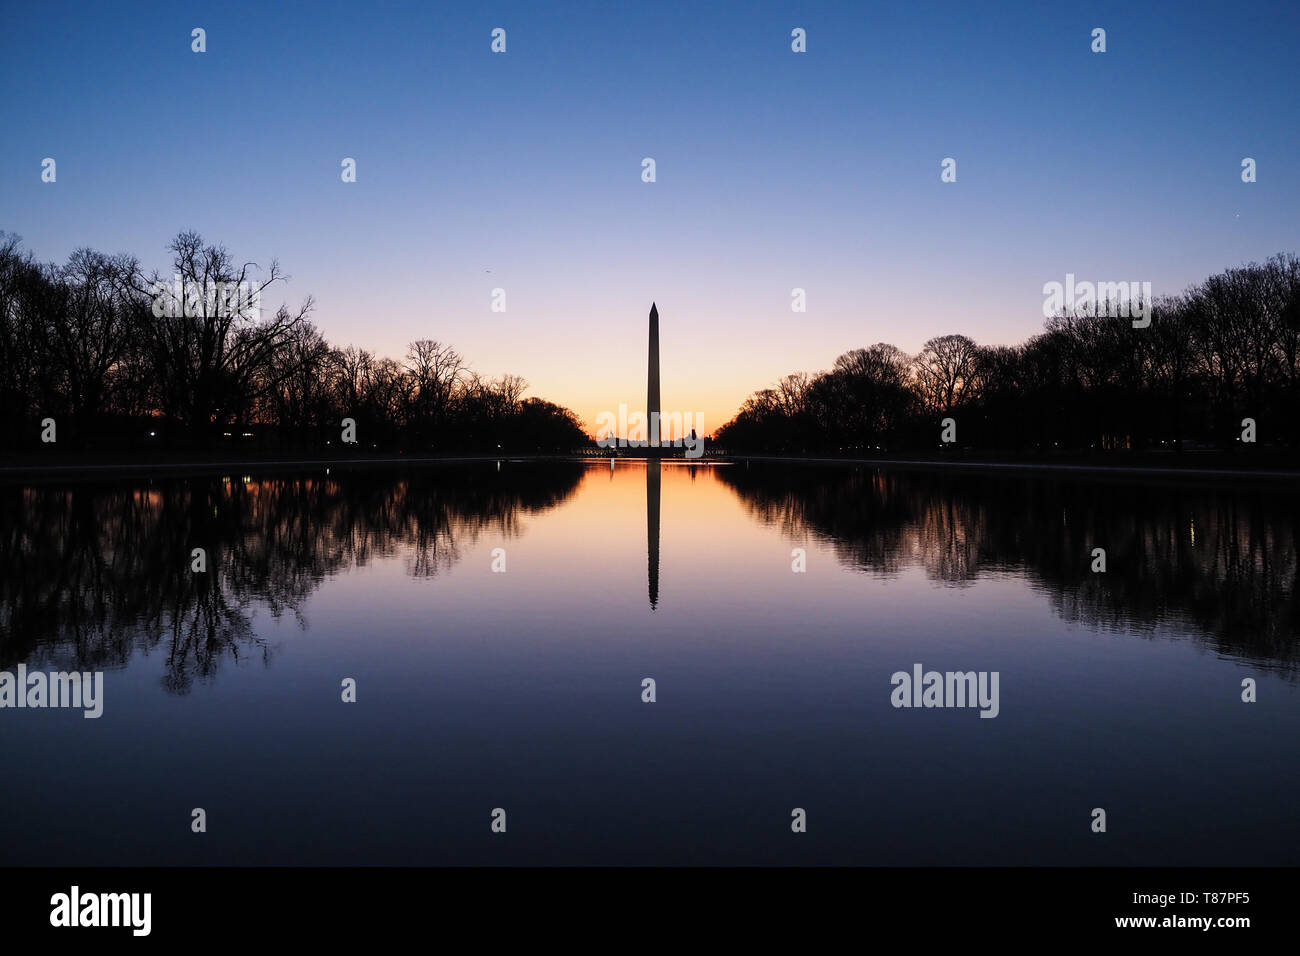 WASHINGTON DC, United States — The Washington Monument before dawn reflects off the glassy water of the Lincoln Memorial Reflecting Pool on the National Mall in Washington DC. Stock Photo